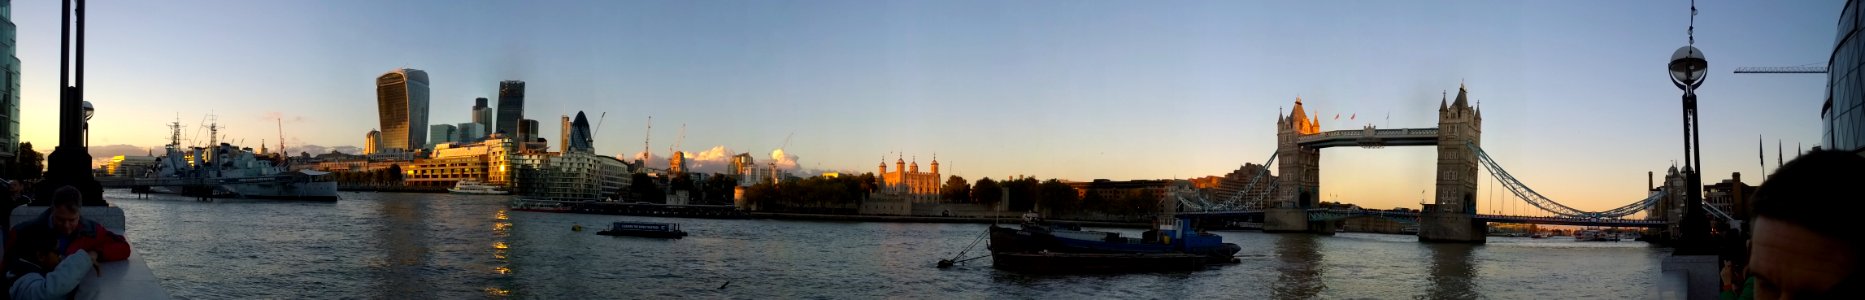 London Panorama of River Thames Tower Bridge The Tower of London and the city photo